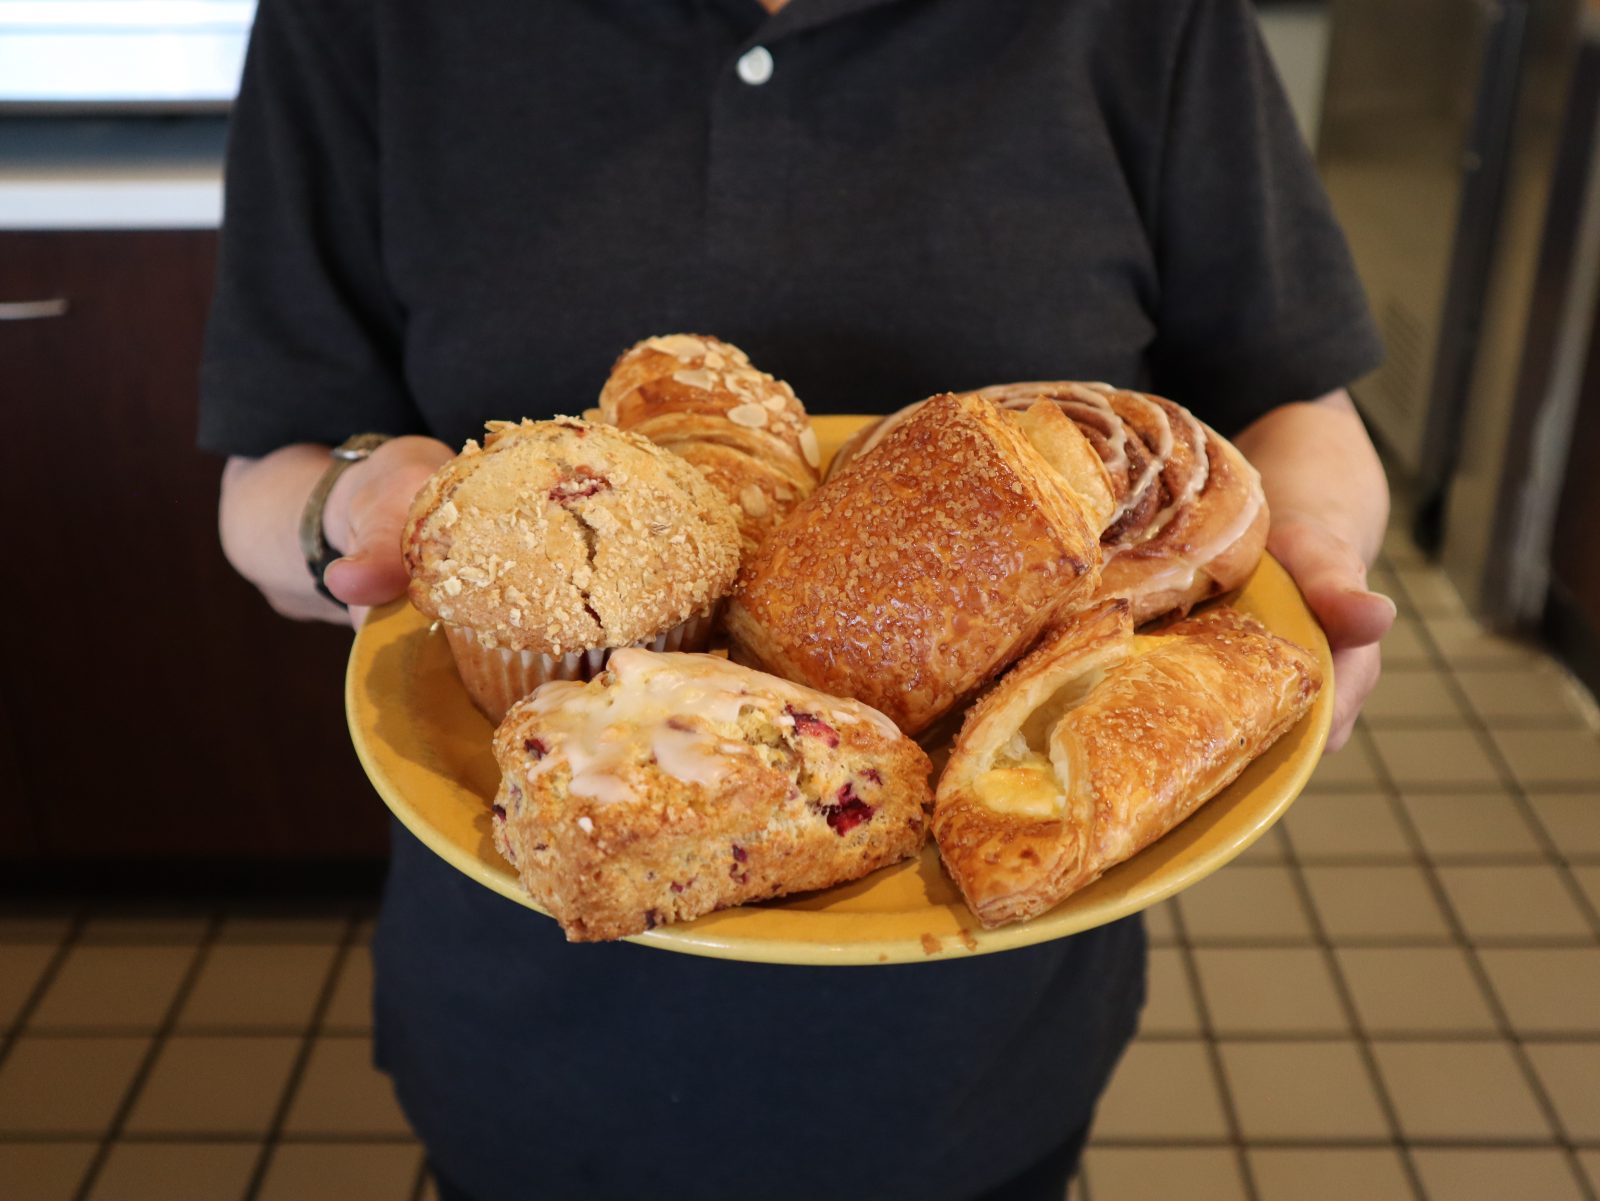 A woman holding a plate full of pastries.